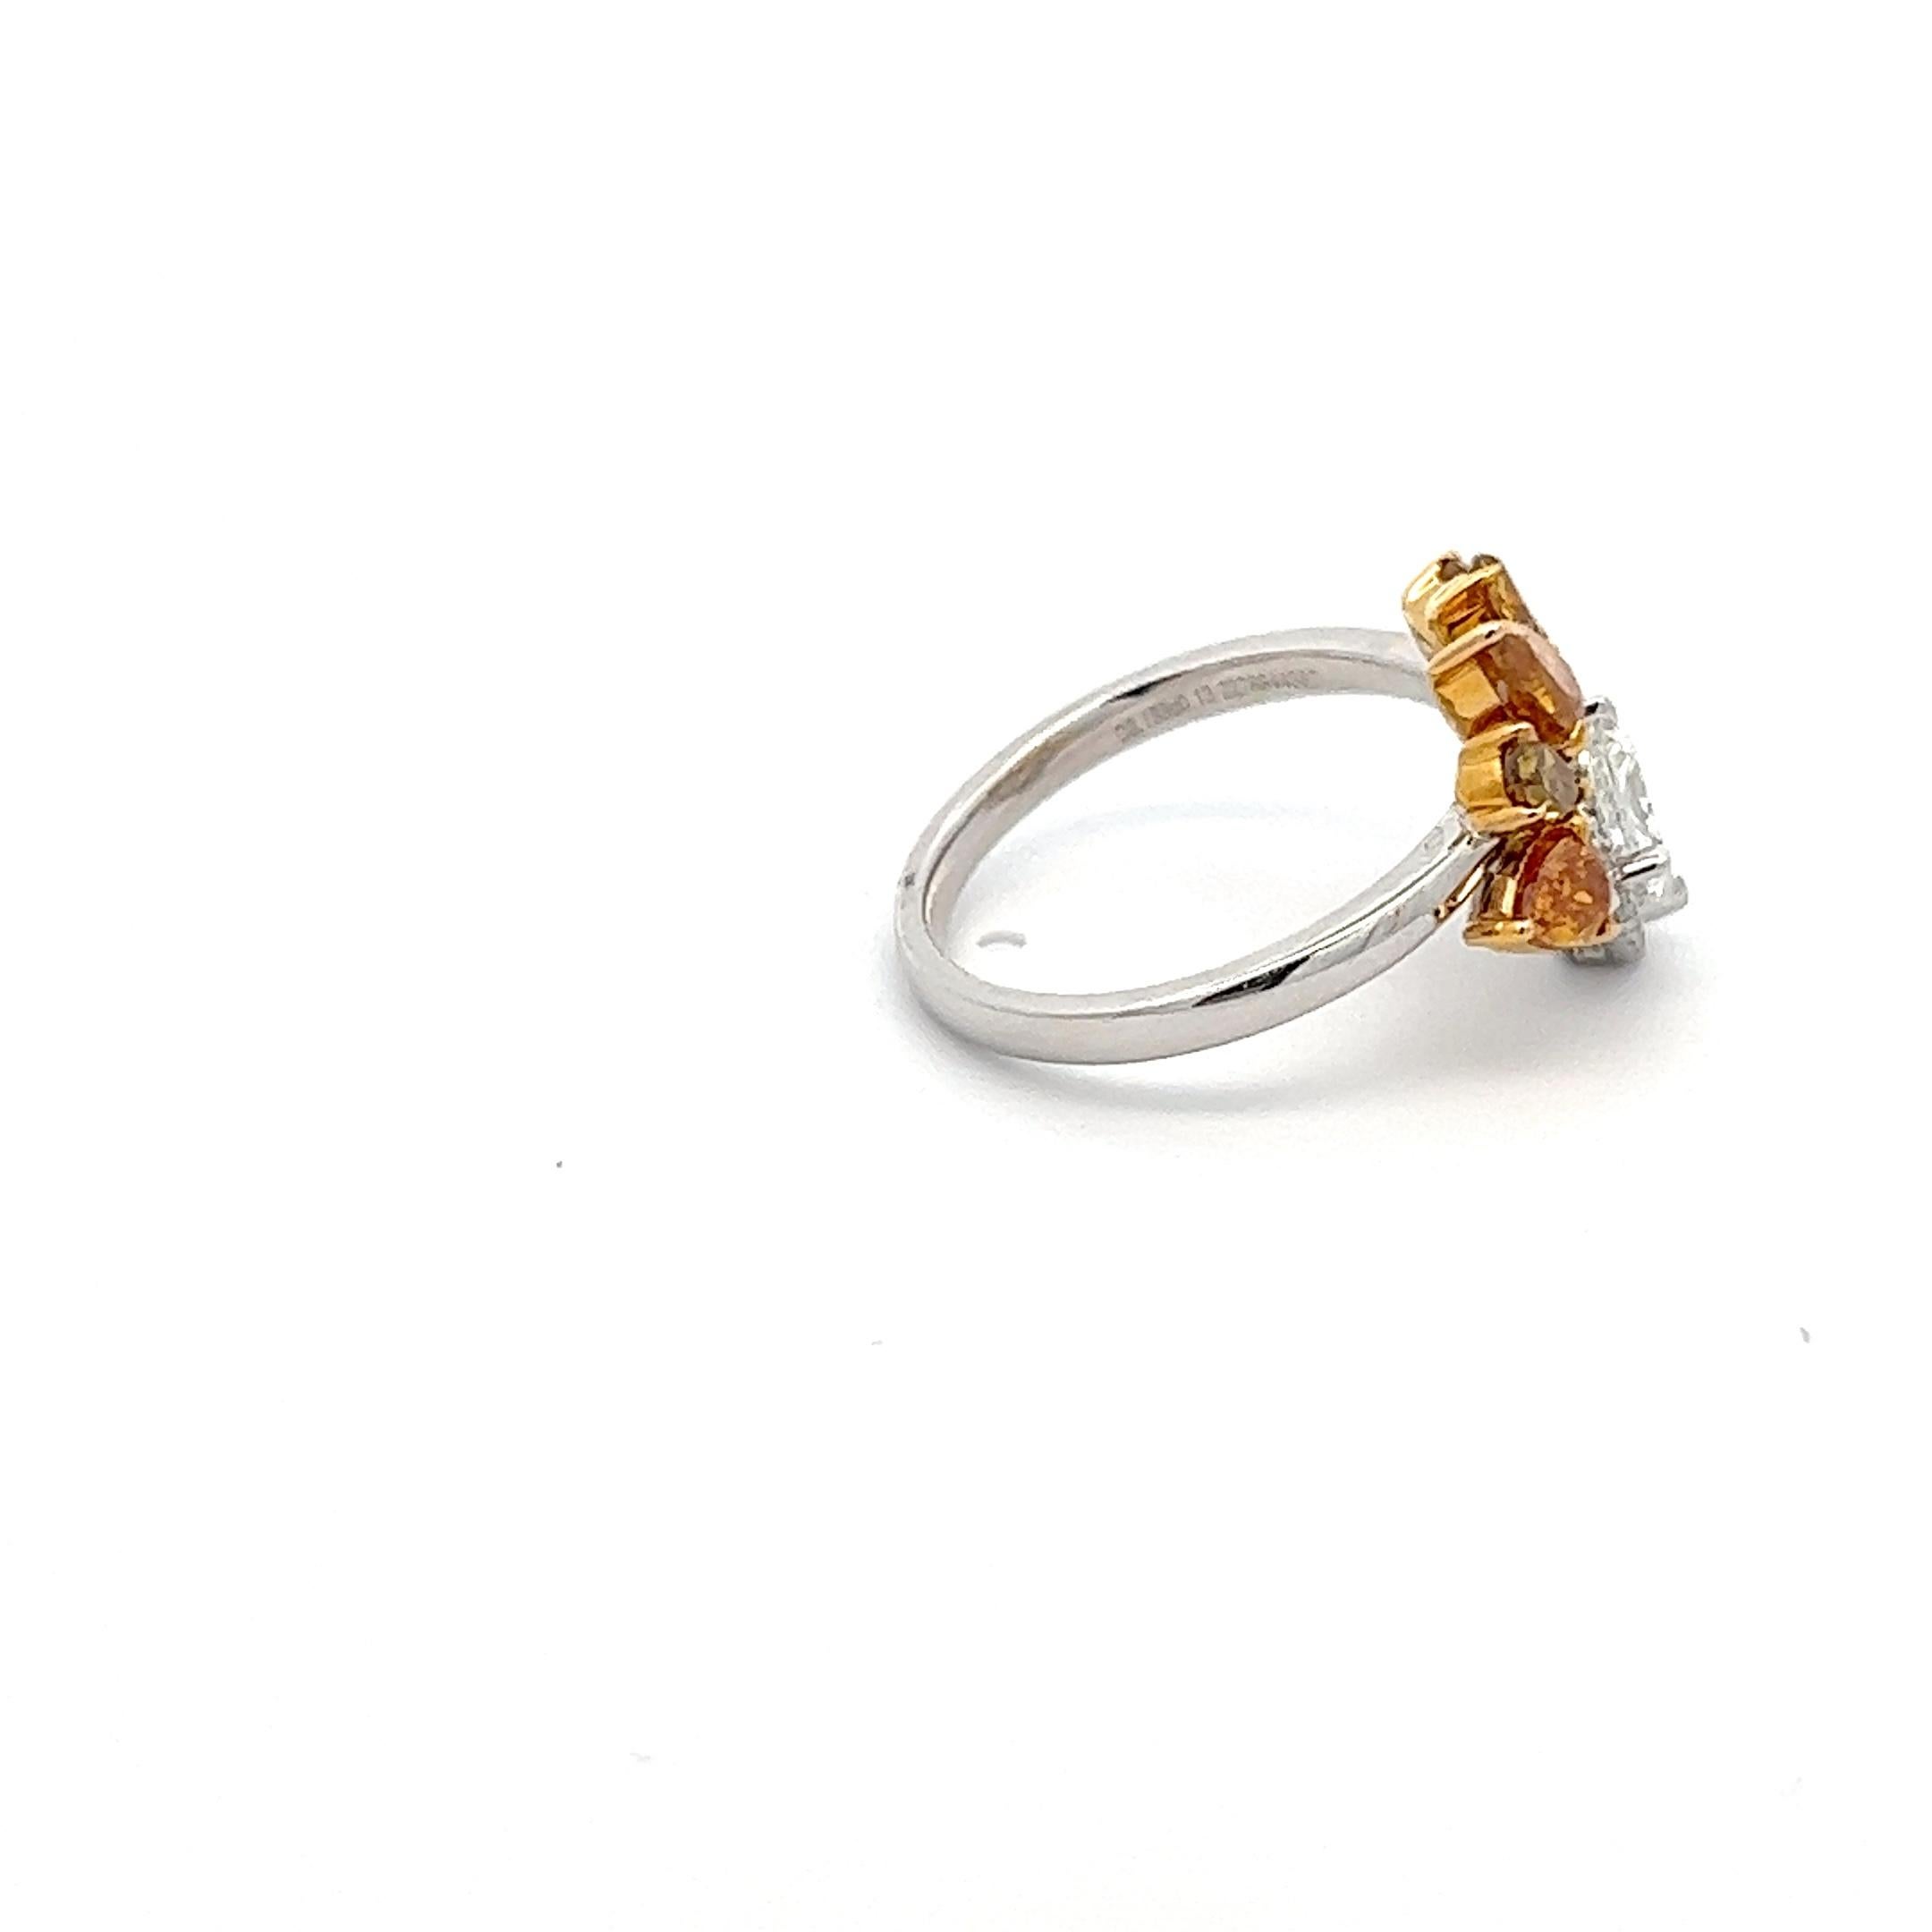 Introducing our stunning asymmetrical ring, a true embodiment of elegance and sophistication. Crafted from the finest 18K two-tone gold, this exquisite piece features a Radiant cut G/VS2 diamond weighing 1.02 carats at its center, surrounded by a